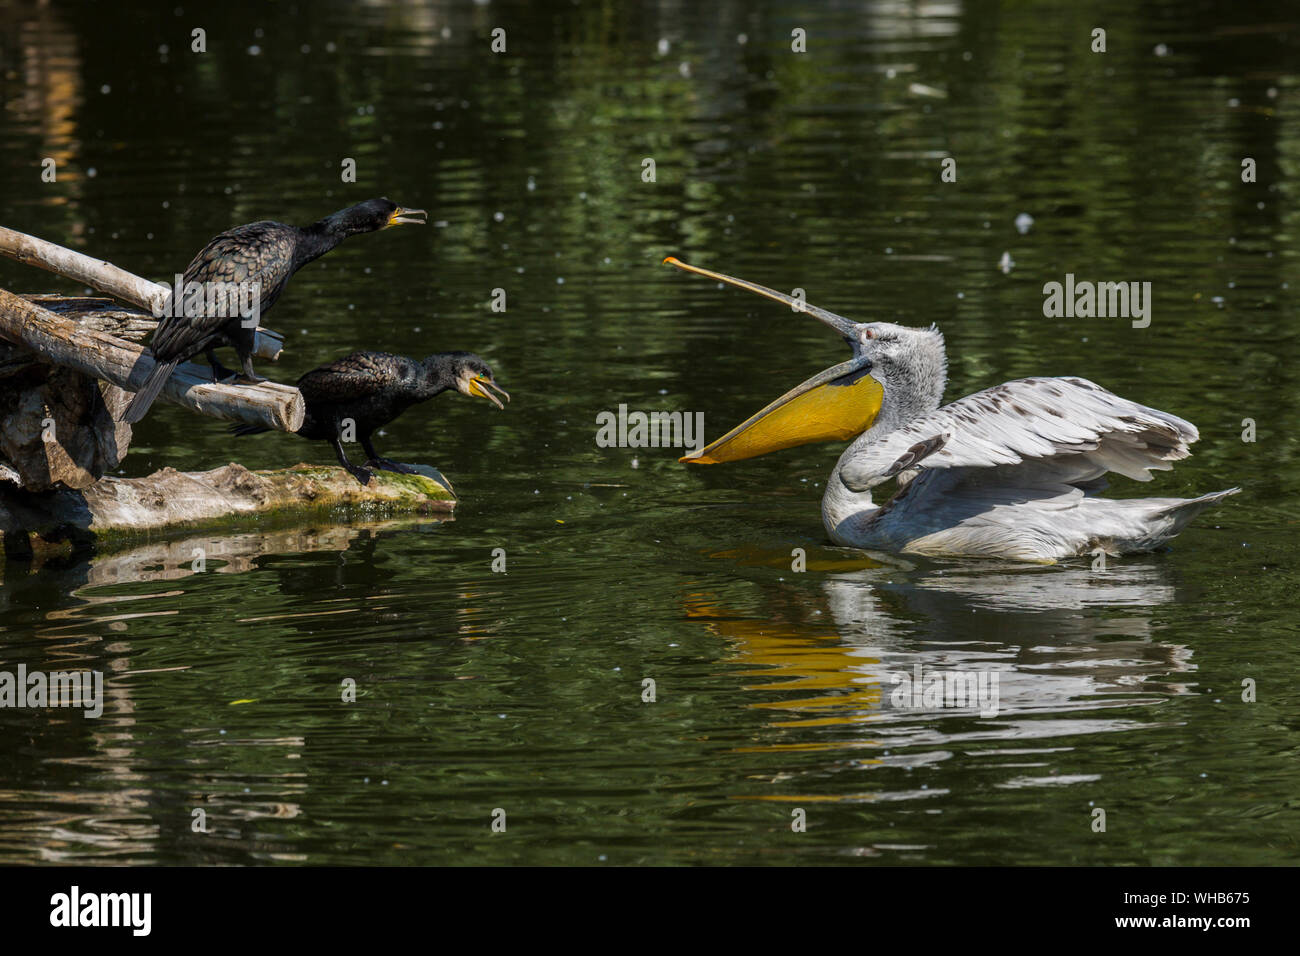 Pelican And Great Cormorants In Lake Stock Photo